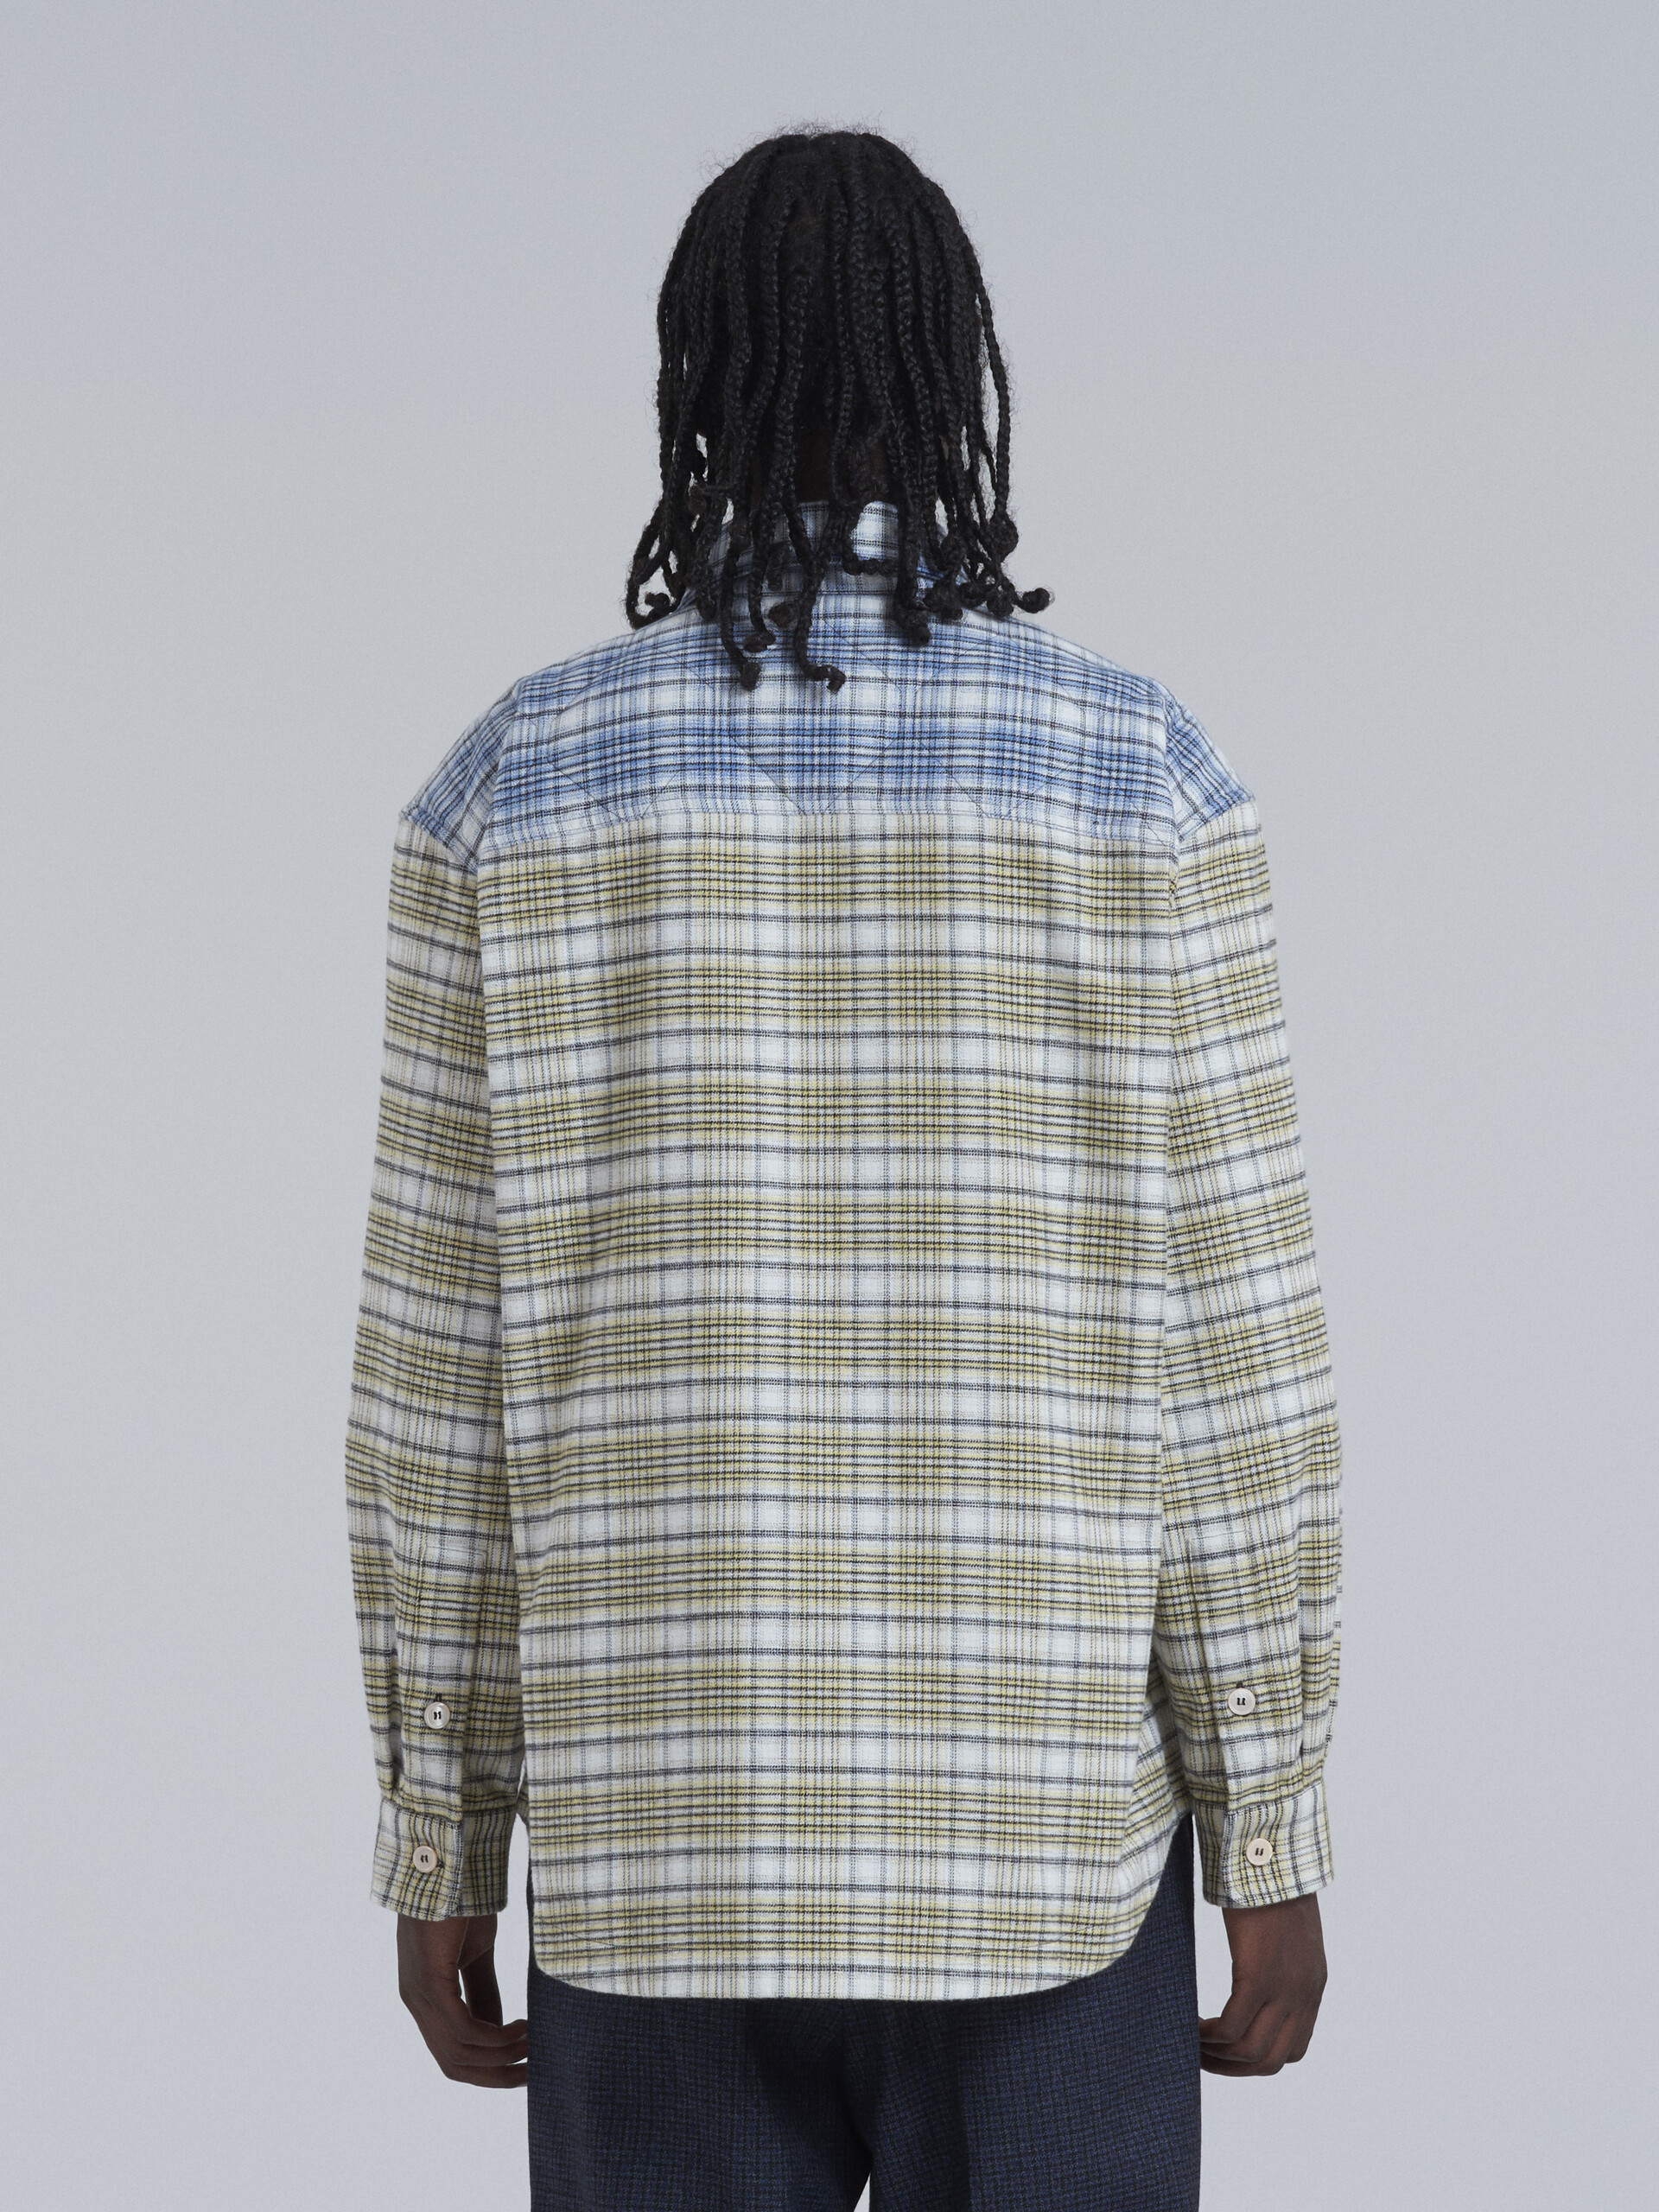 Flannel shirt with colour block check pattern - Shirts - Image 3